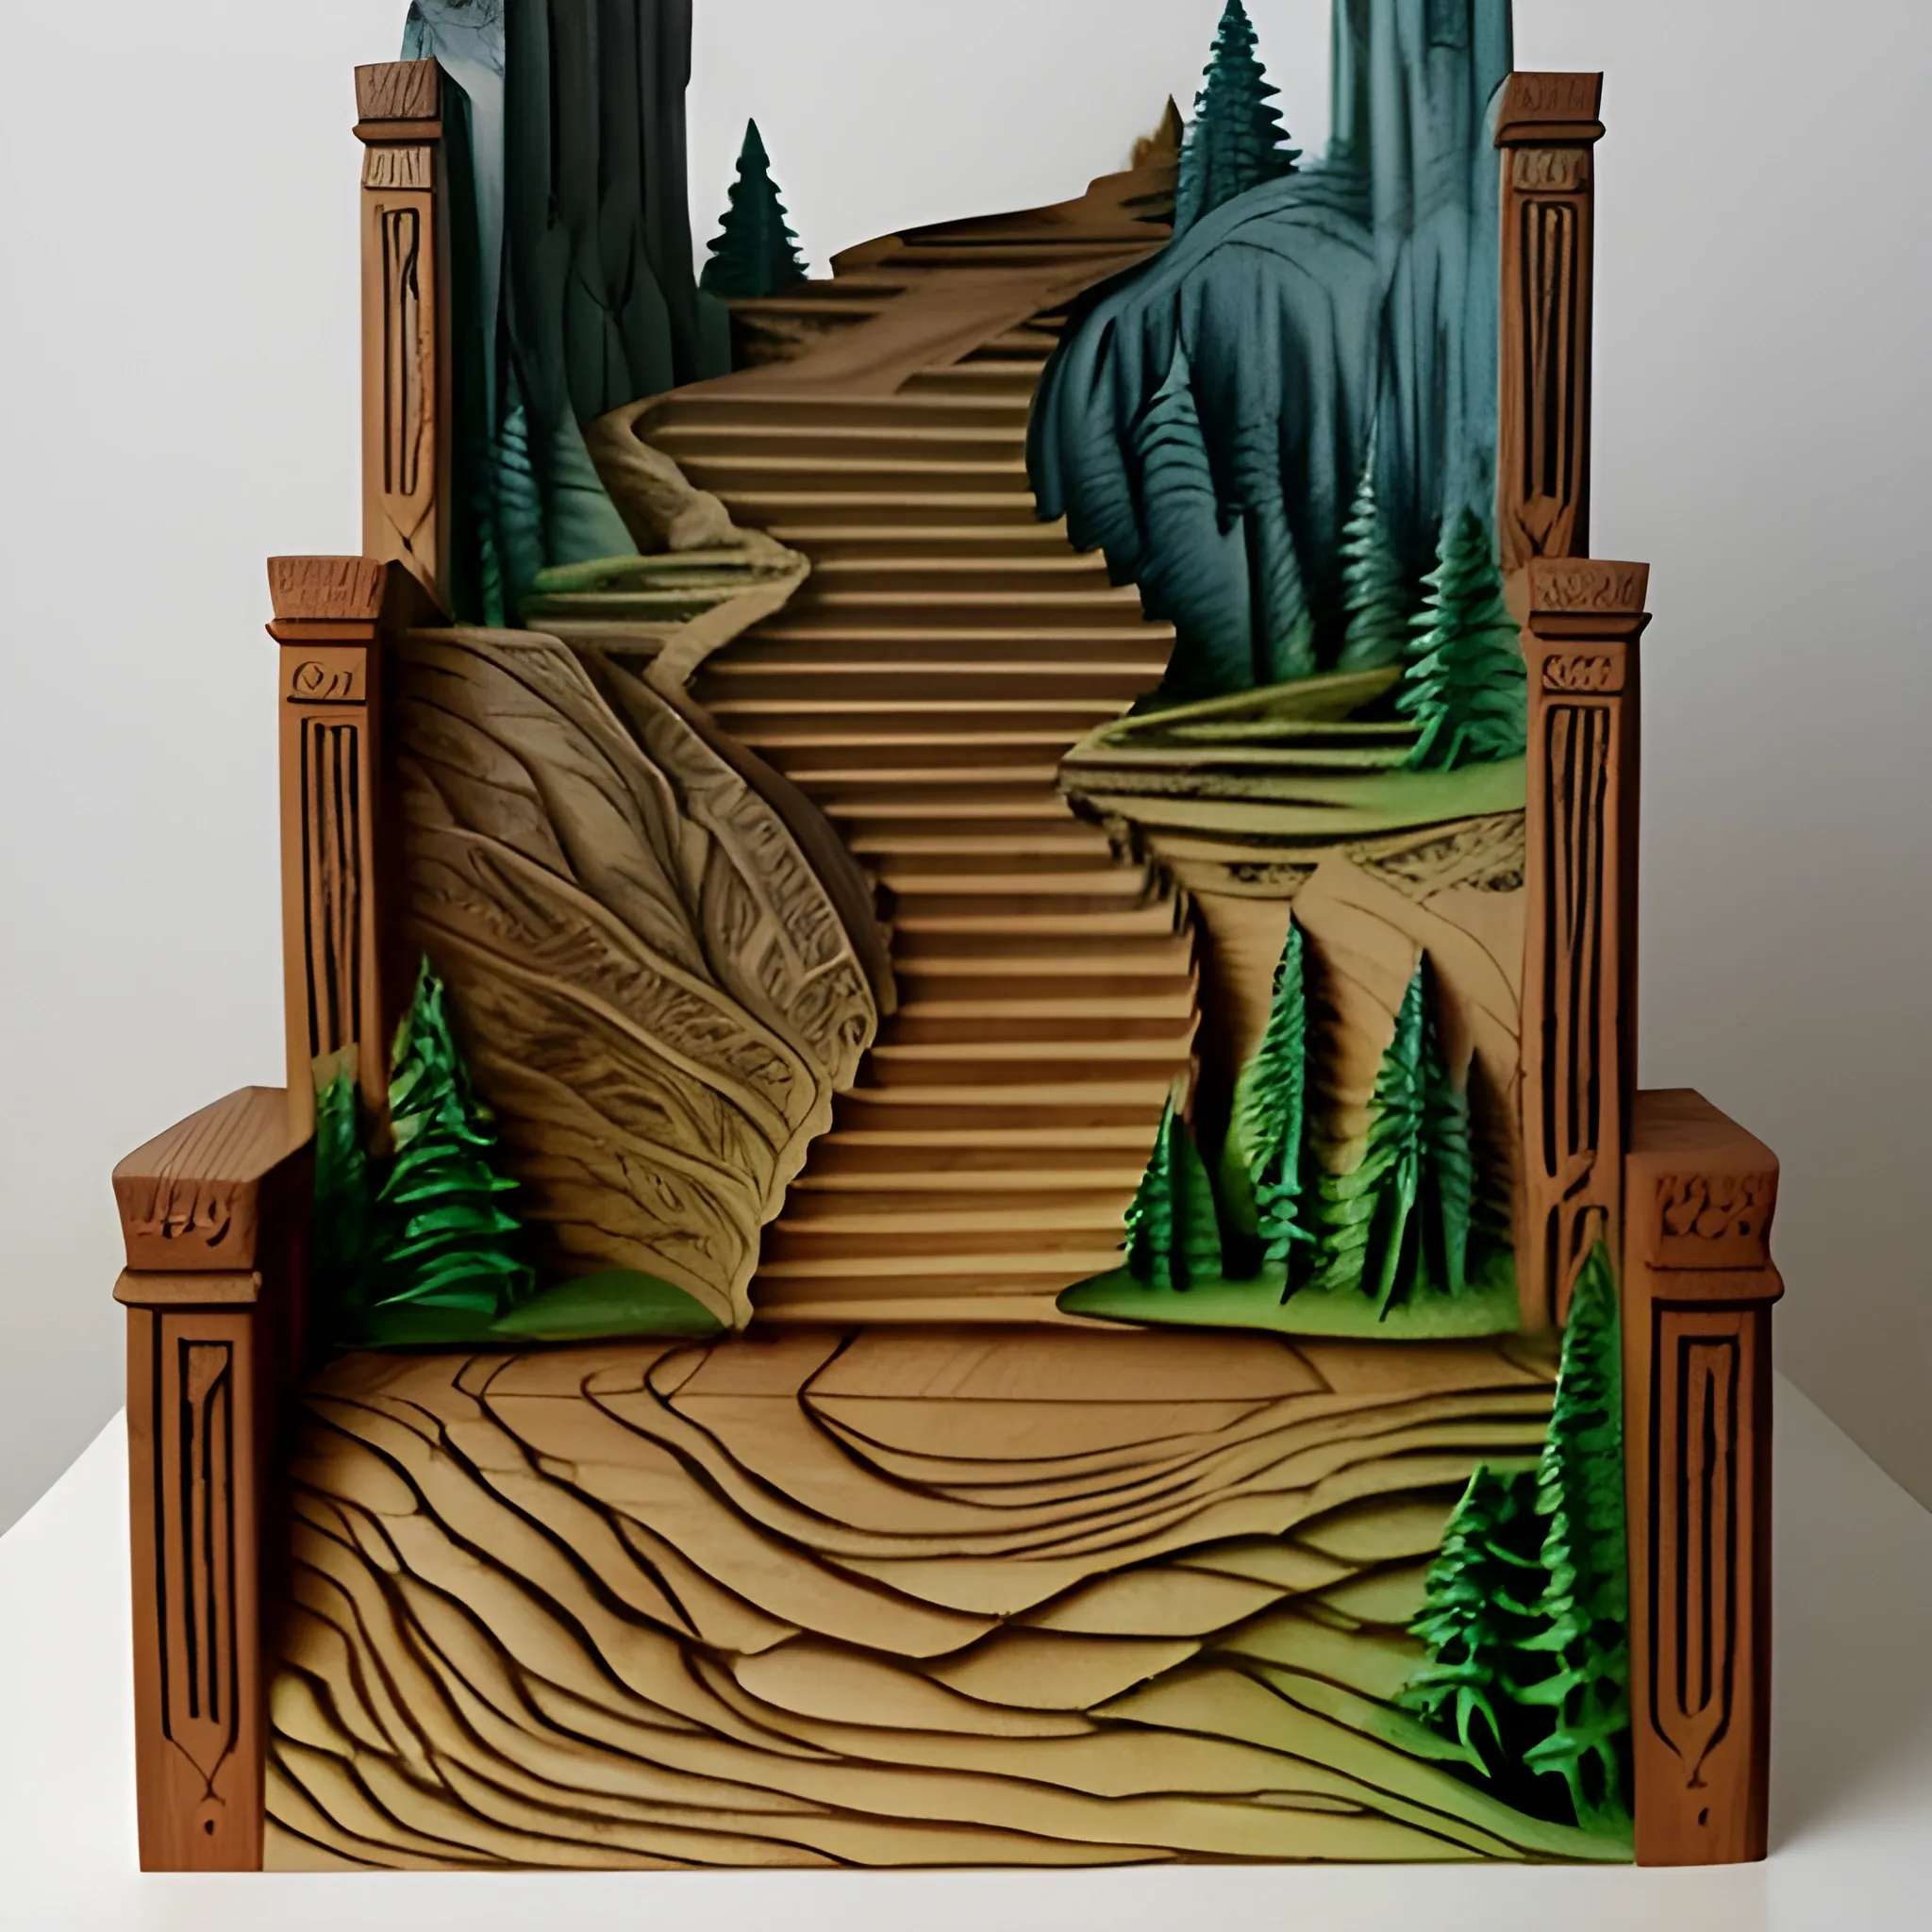 carved wooden fantasy paper looking like stairs, landscape fond dreamy